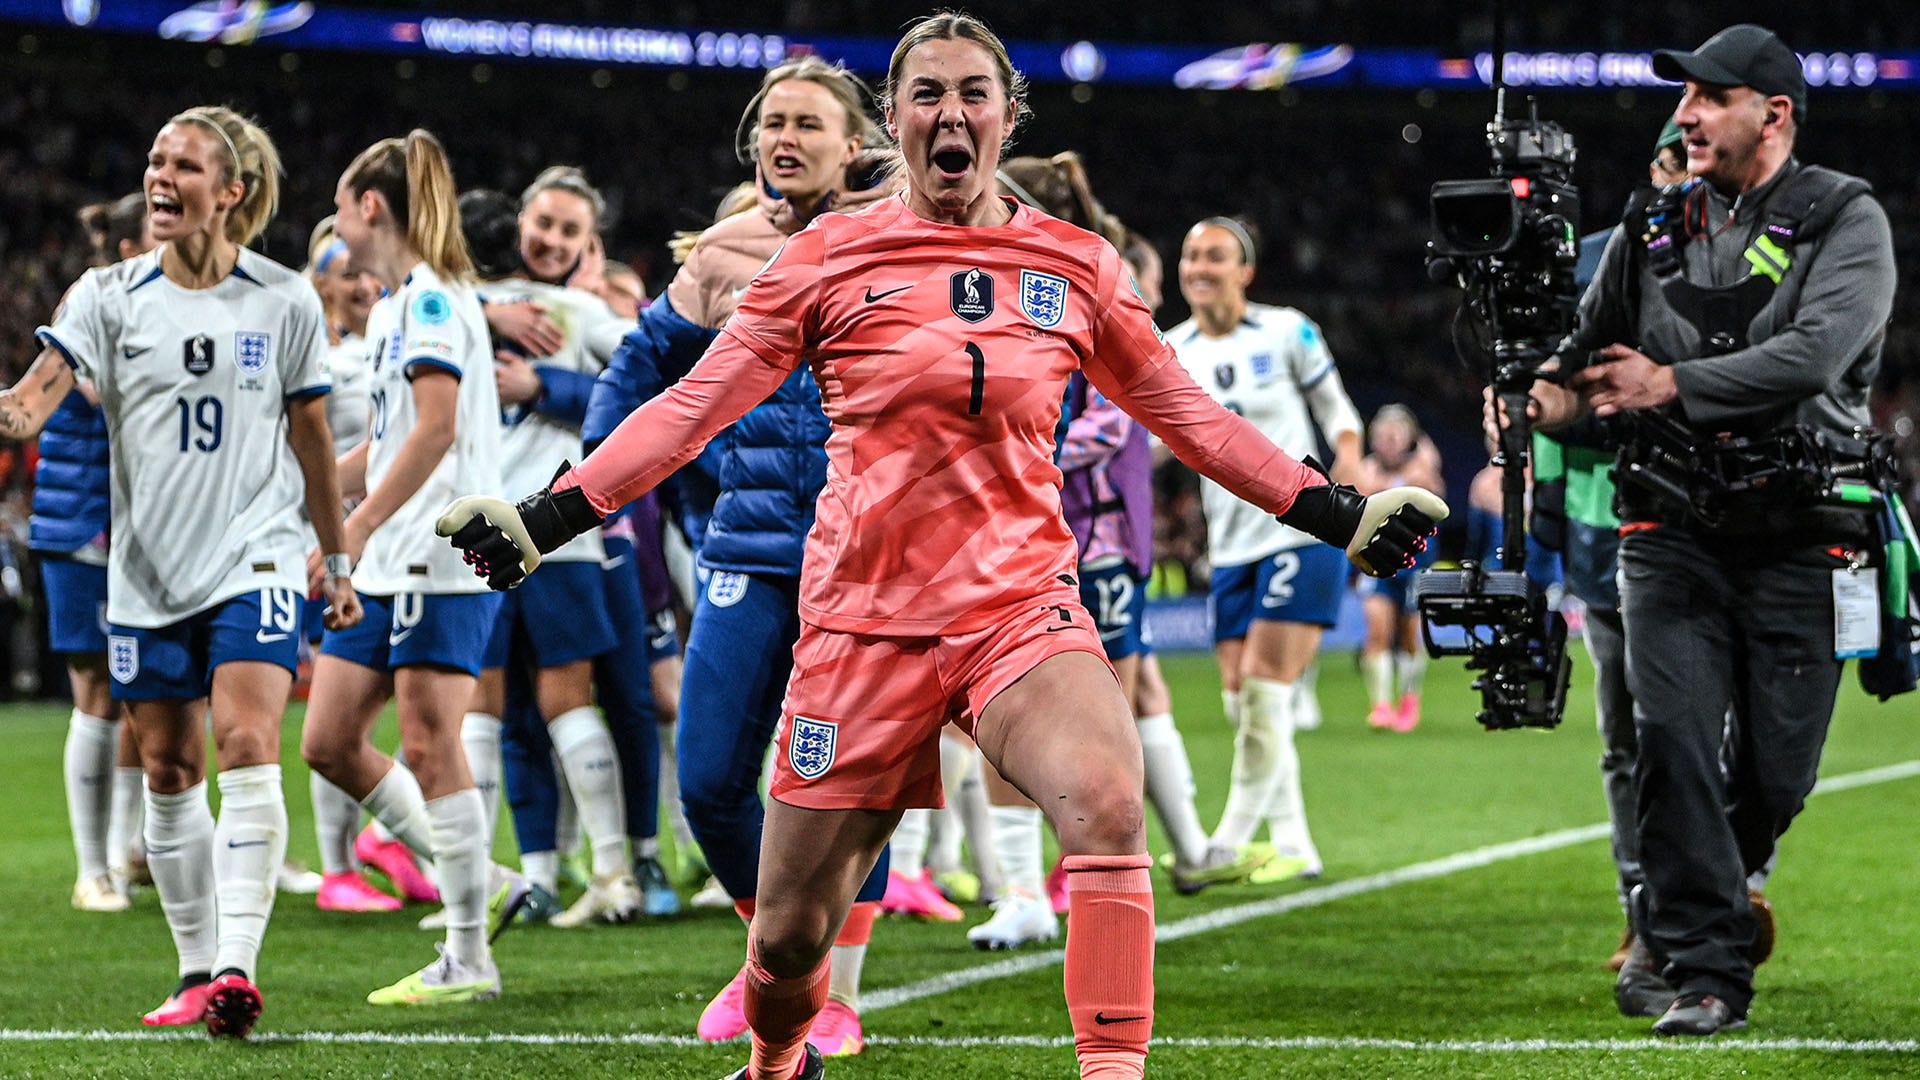 England women's player ratings vs Brazil: Lauren James and Lucy Bronze link brilliantly while Mary Earps redeems herself in Finalissima win over Brazil